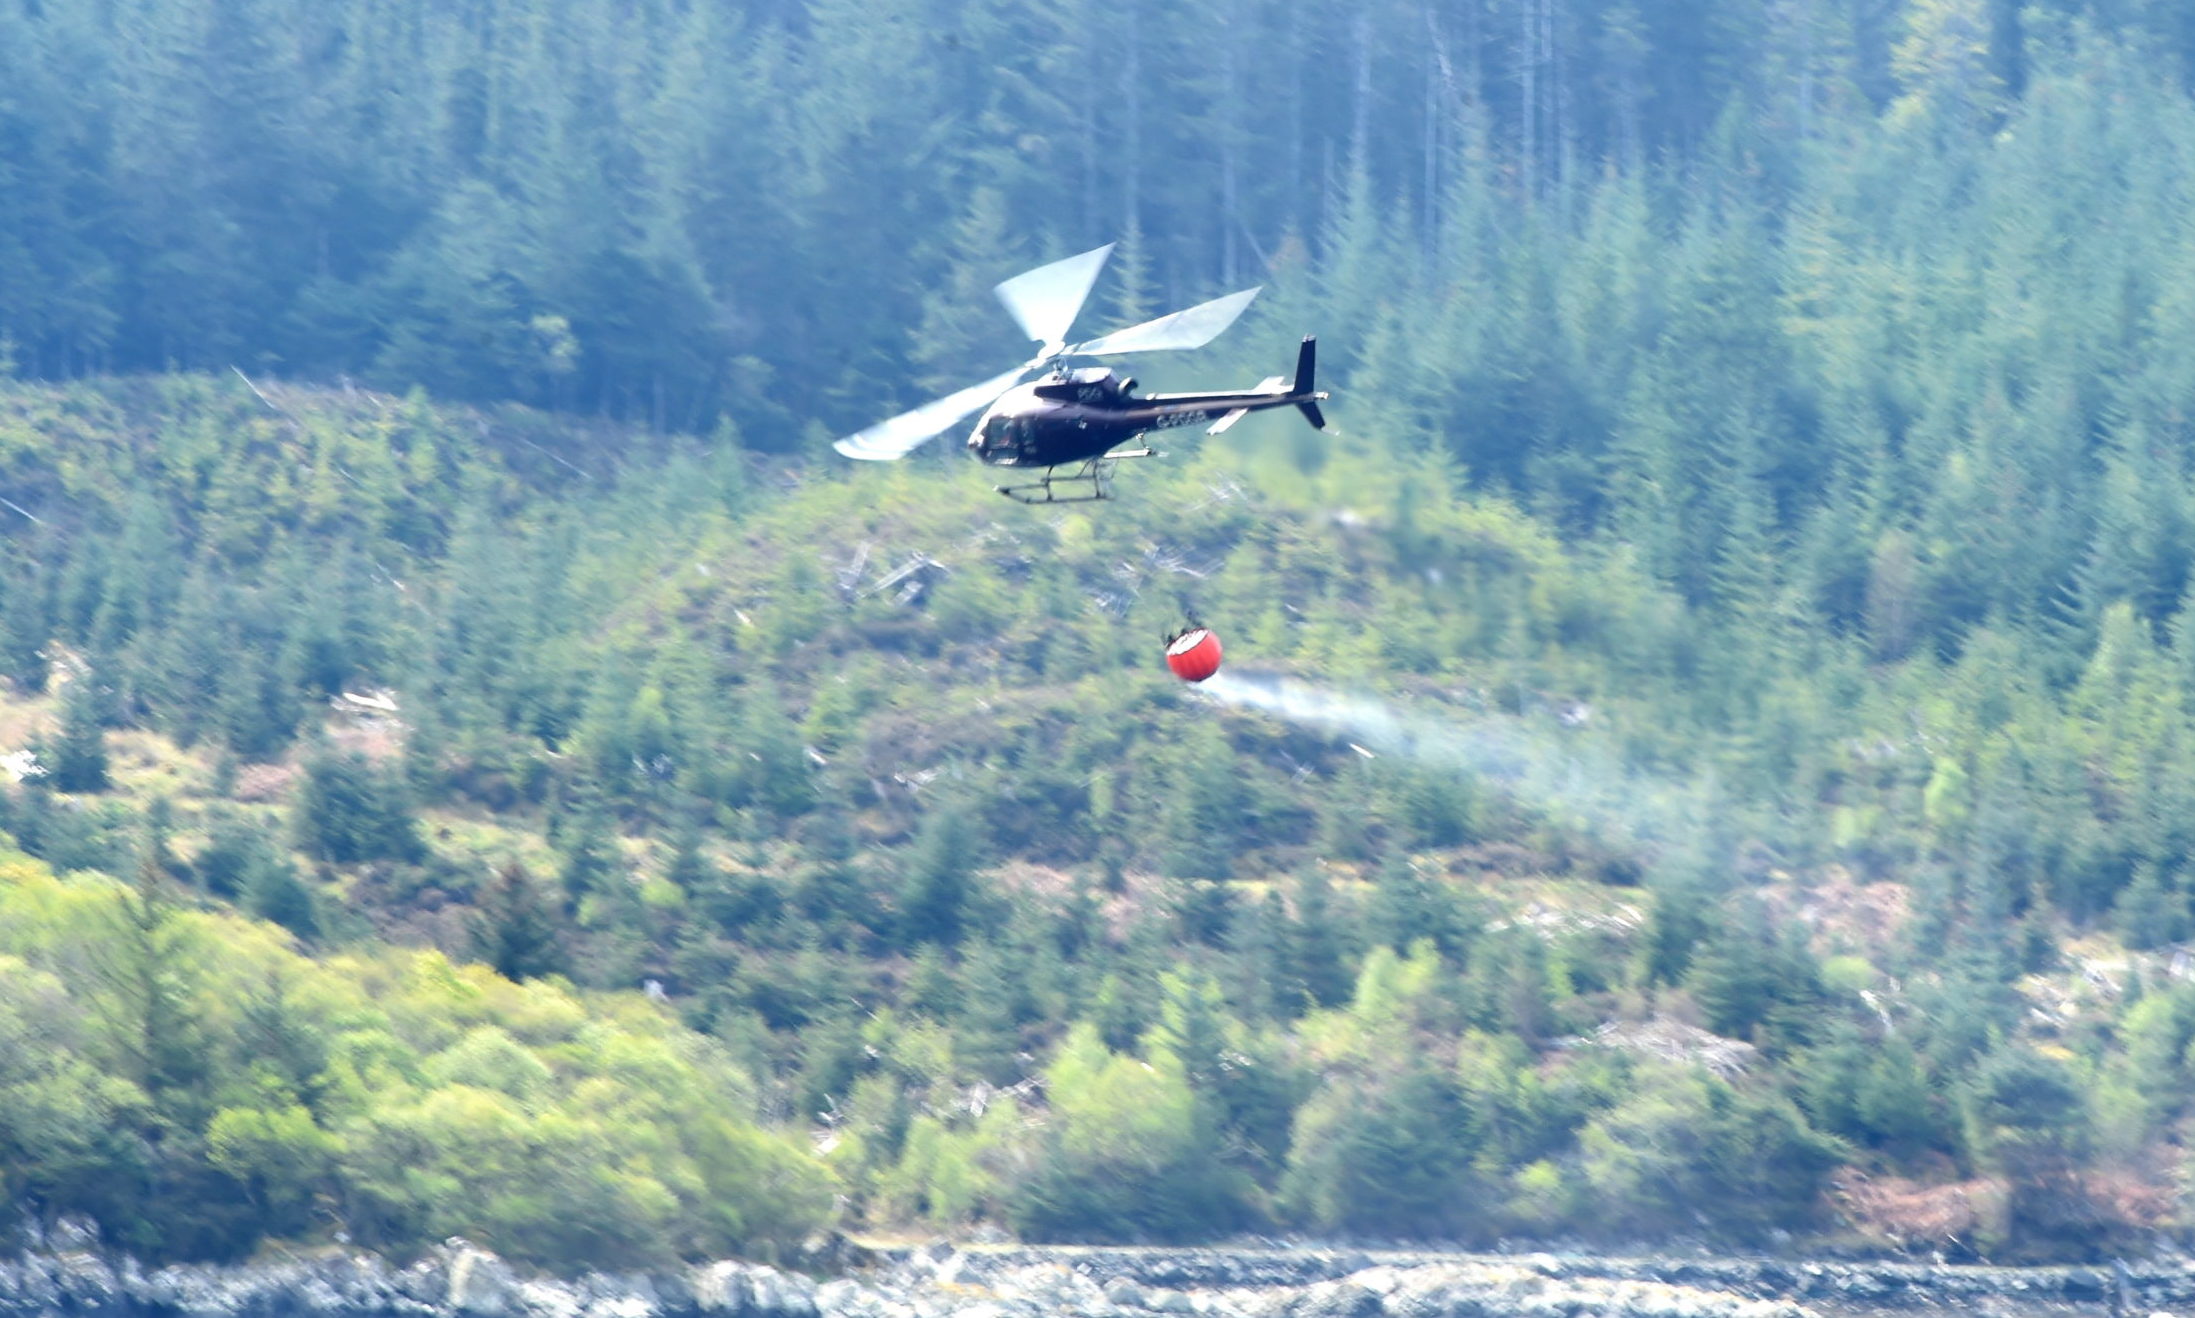 A helicopter is used to assist ground crews fighting the wild fire.
Picture by Sandy McCook.